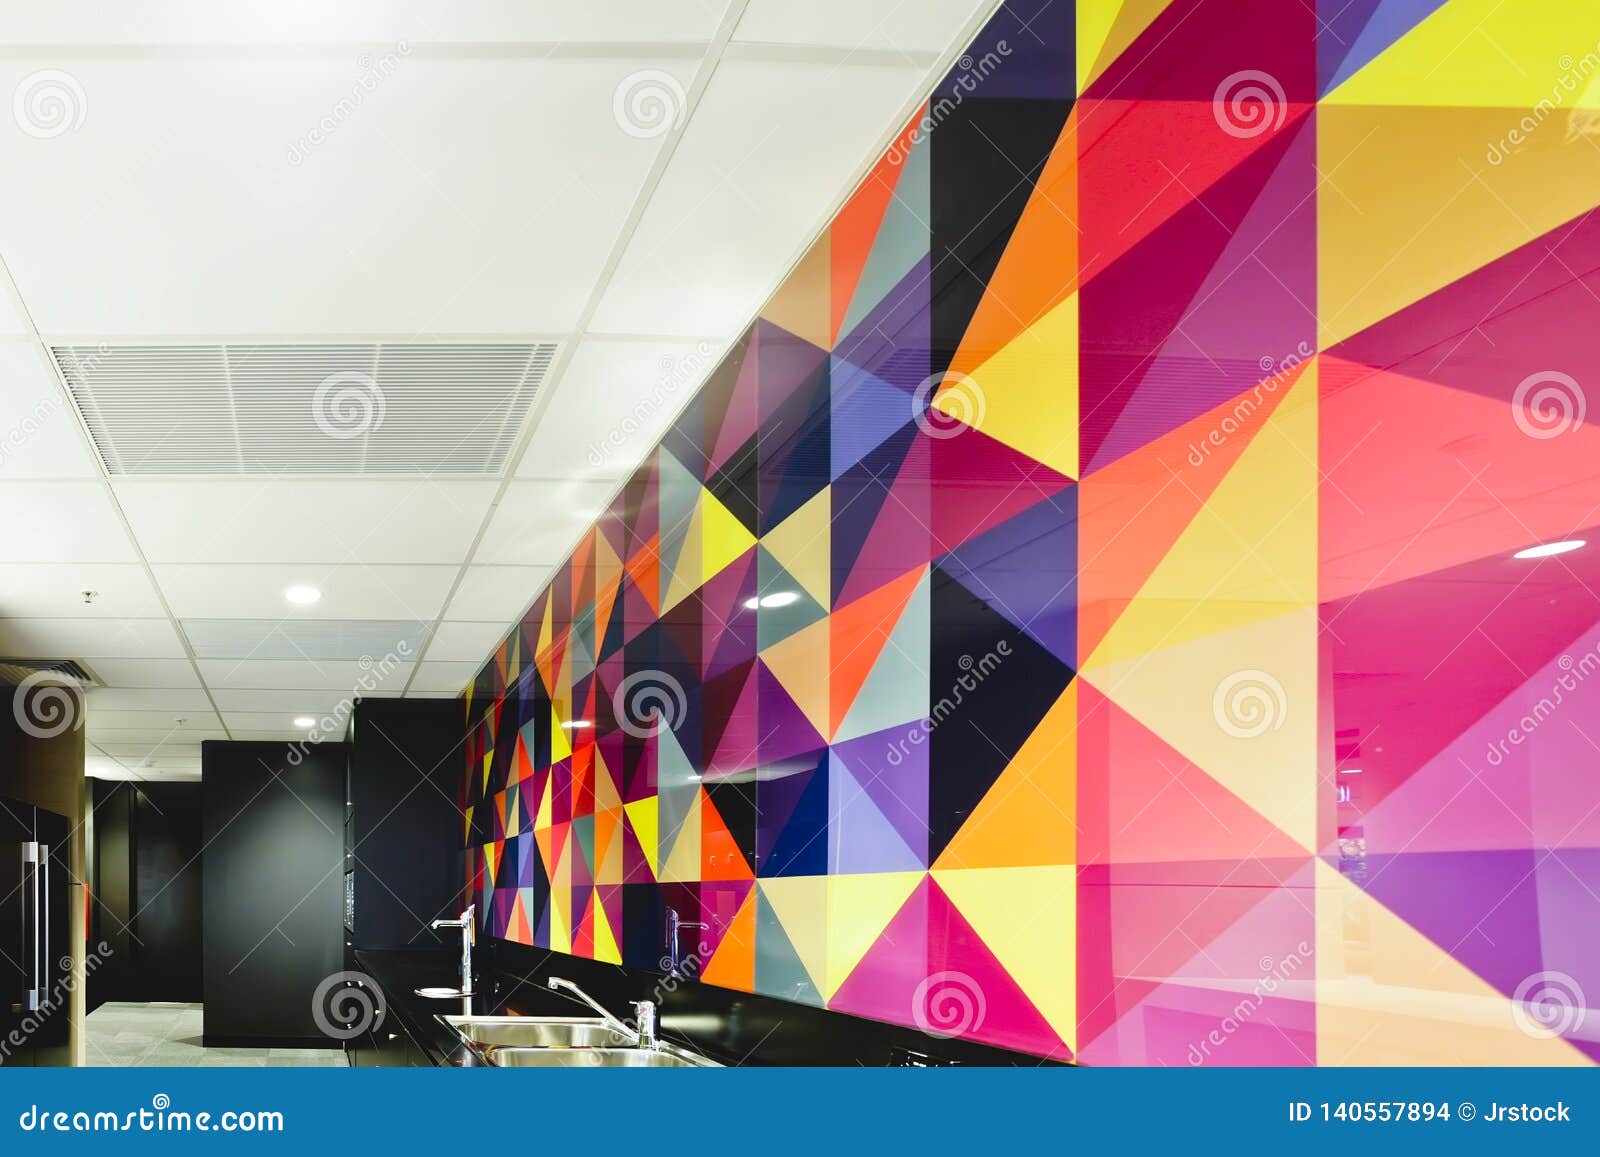 Modern and Colorful Wall Tiles Design of a Kitchen Stock Photo ...